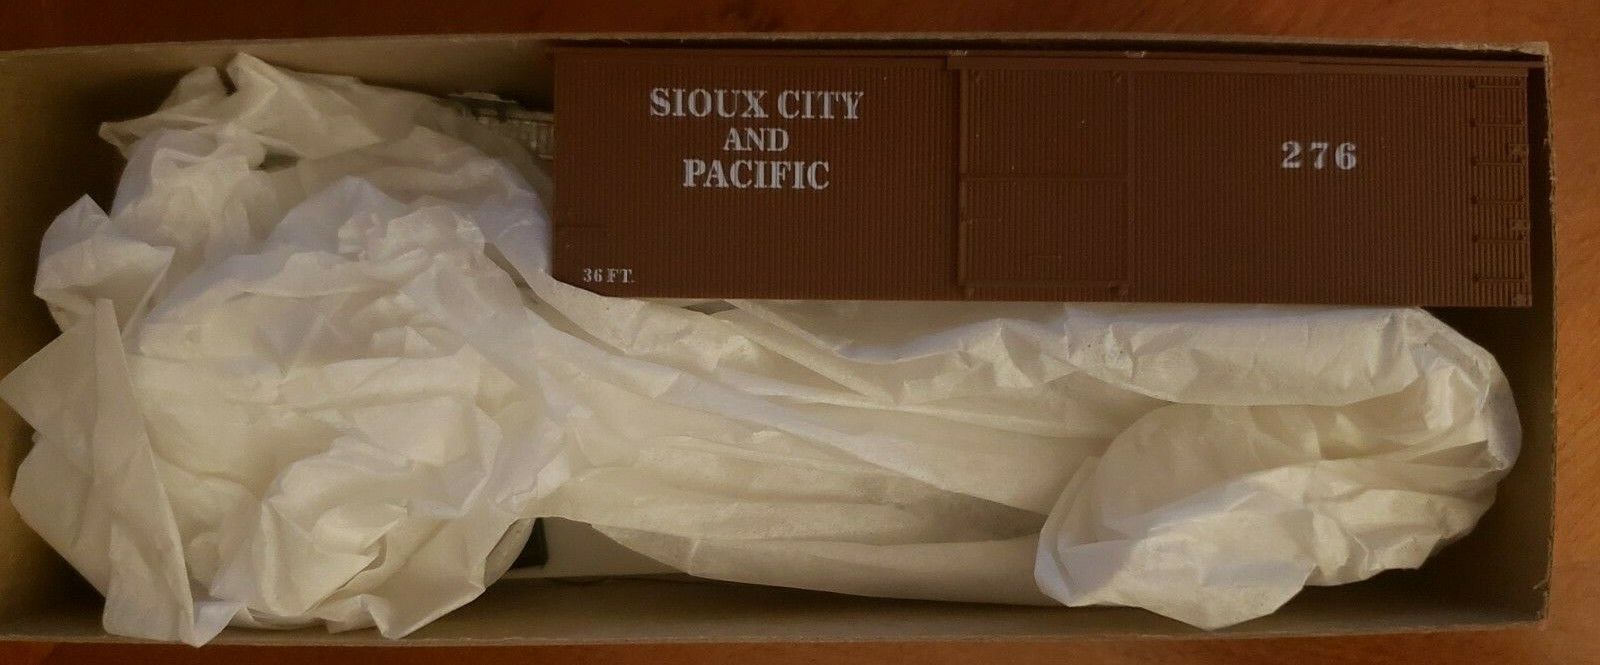 Roundhouse HO Scale 36 Sioux City Pacific Truss-Rod Boxcar "Old Timer" Kit 07908